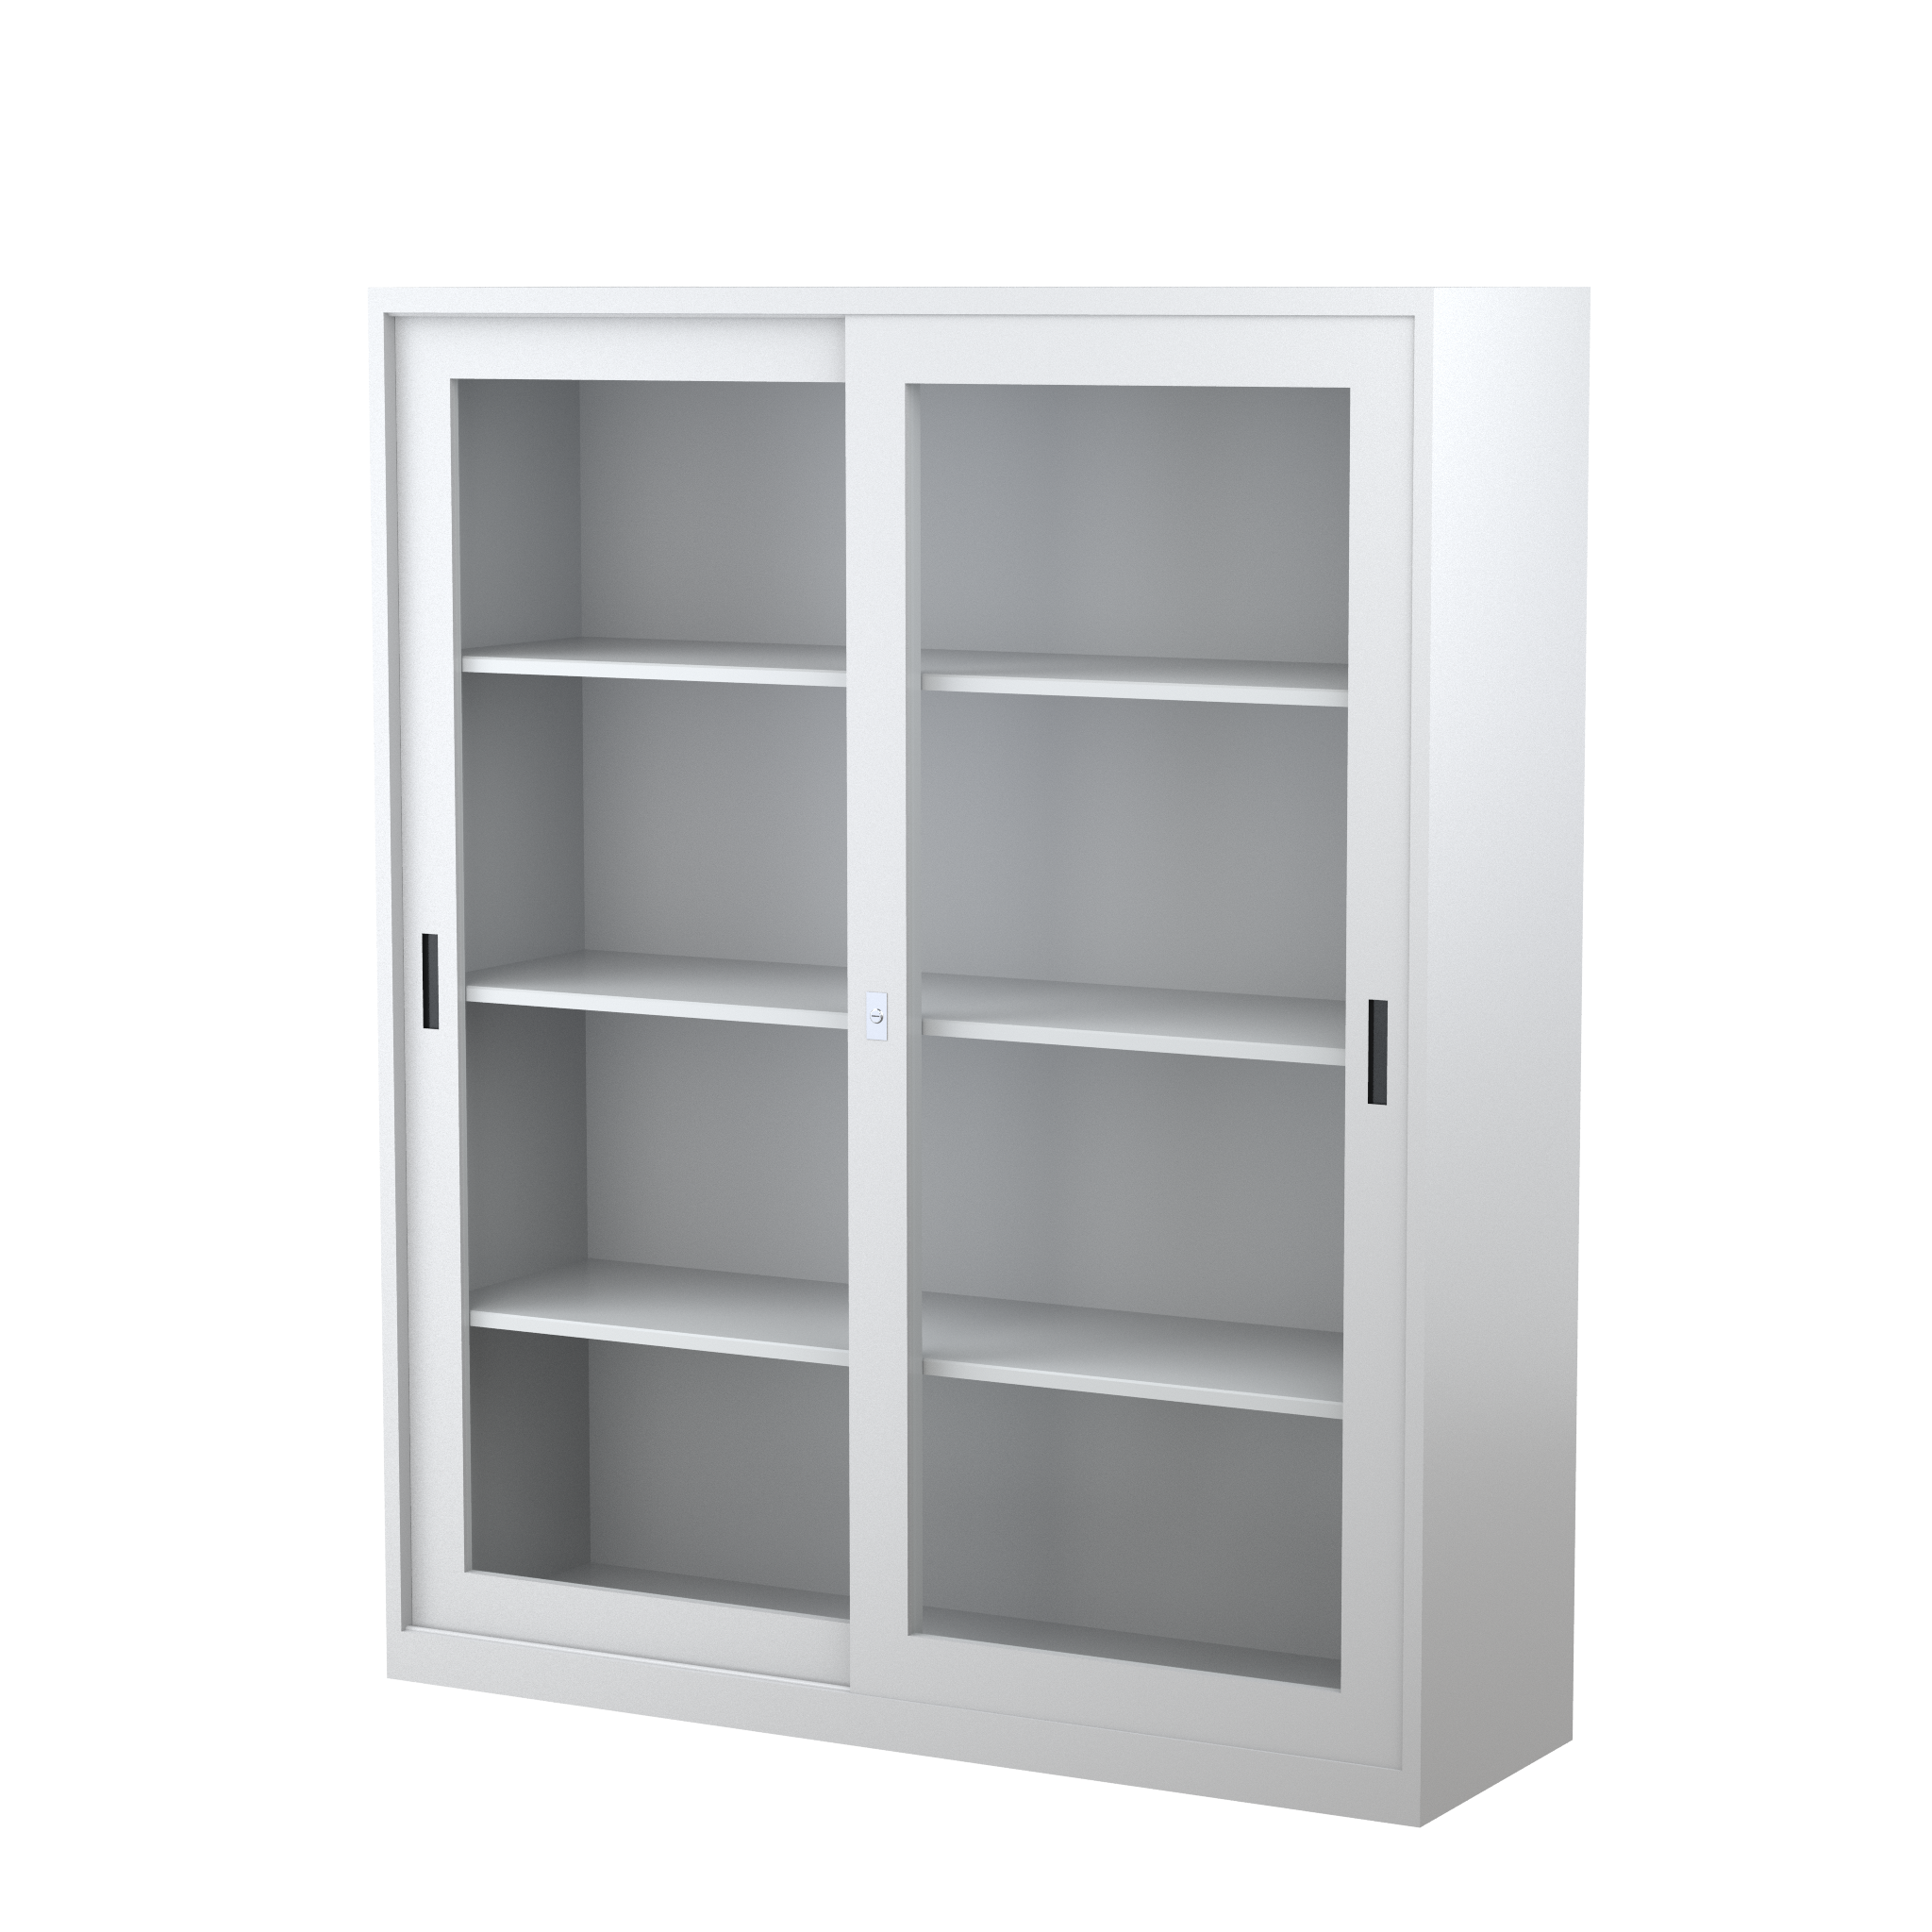 GD1830_1500 - STEELCO SG Cabinet 1830H x 1500W x 464D - 3 Shelves-WS.png